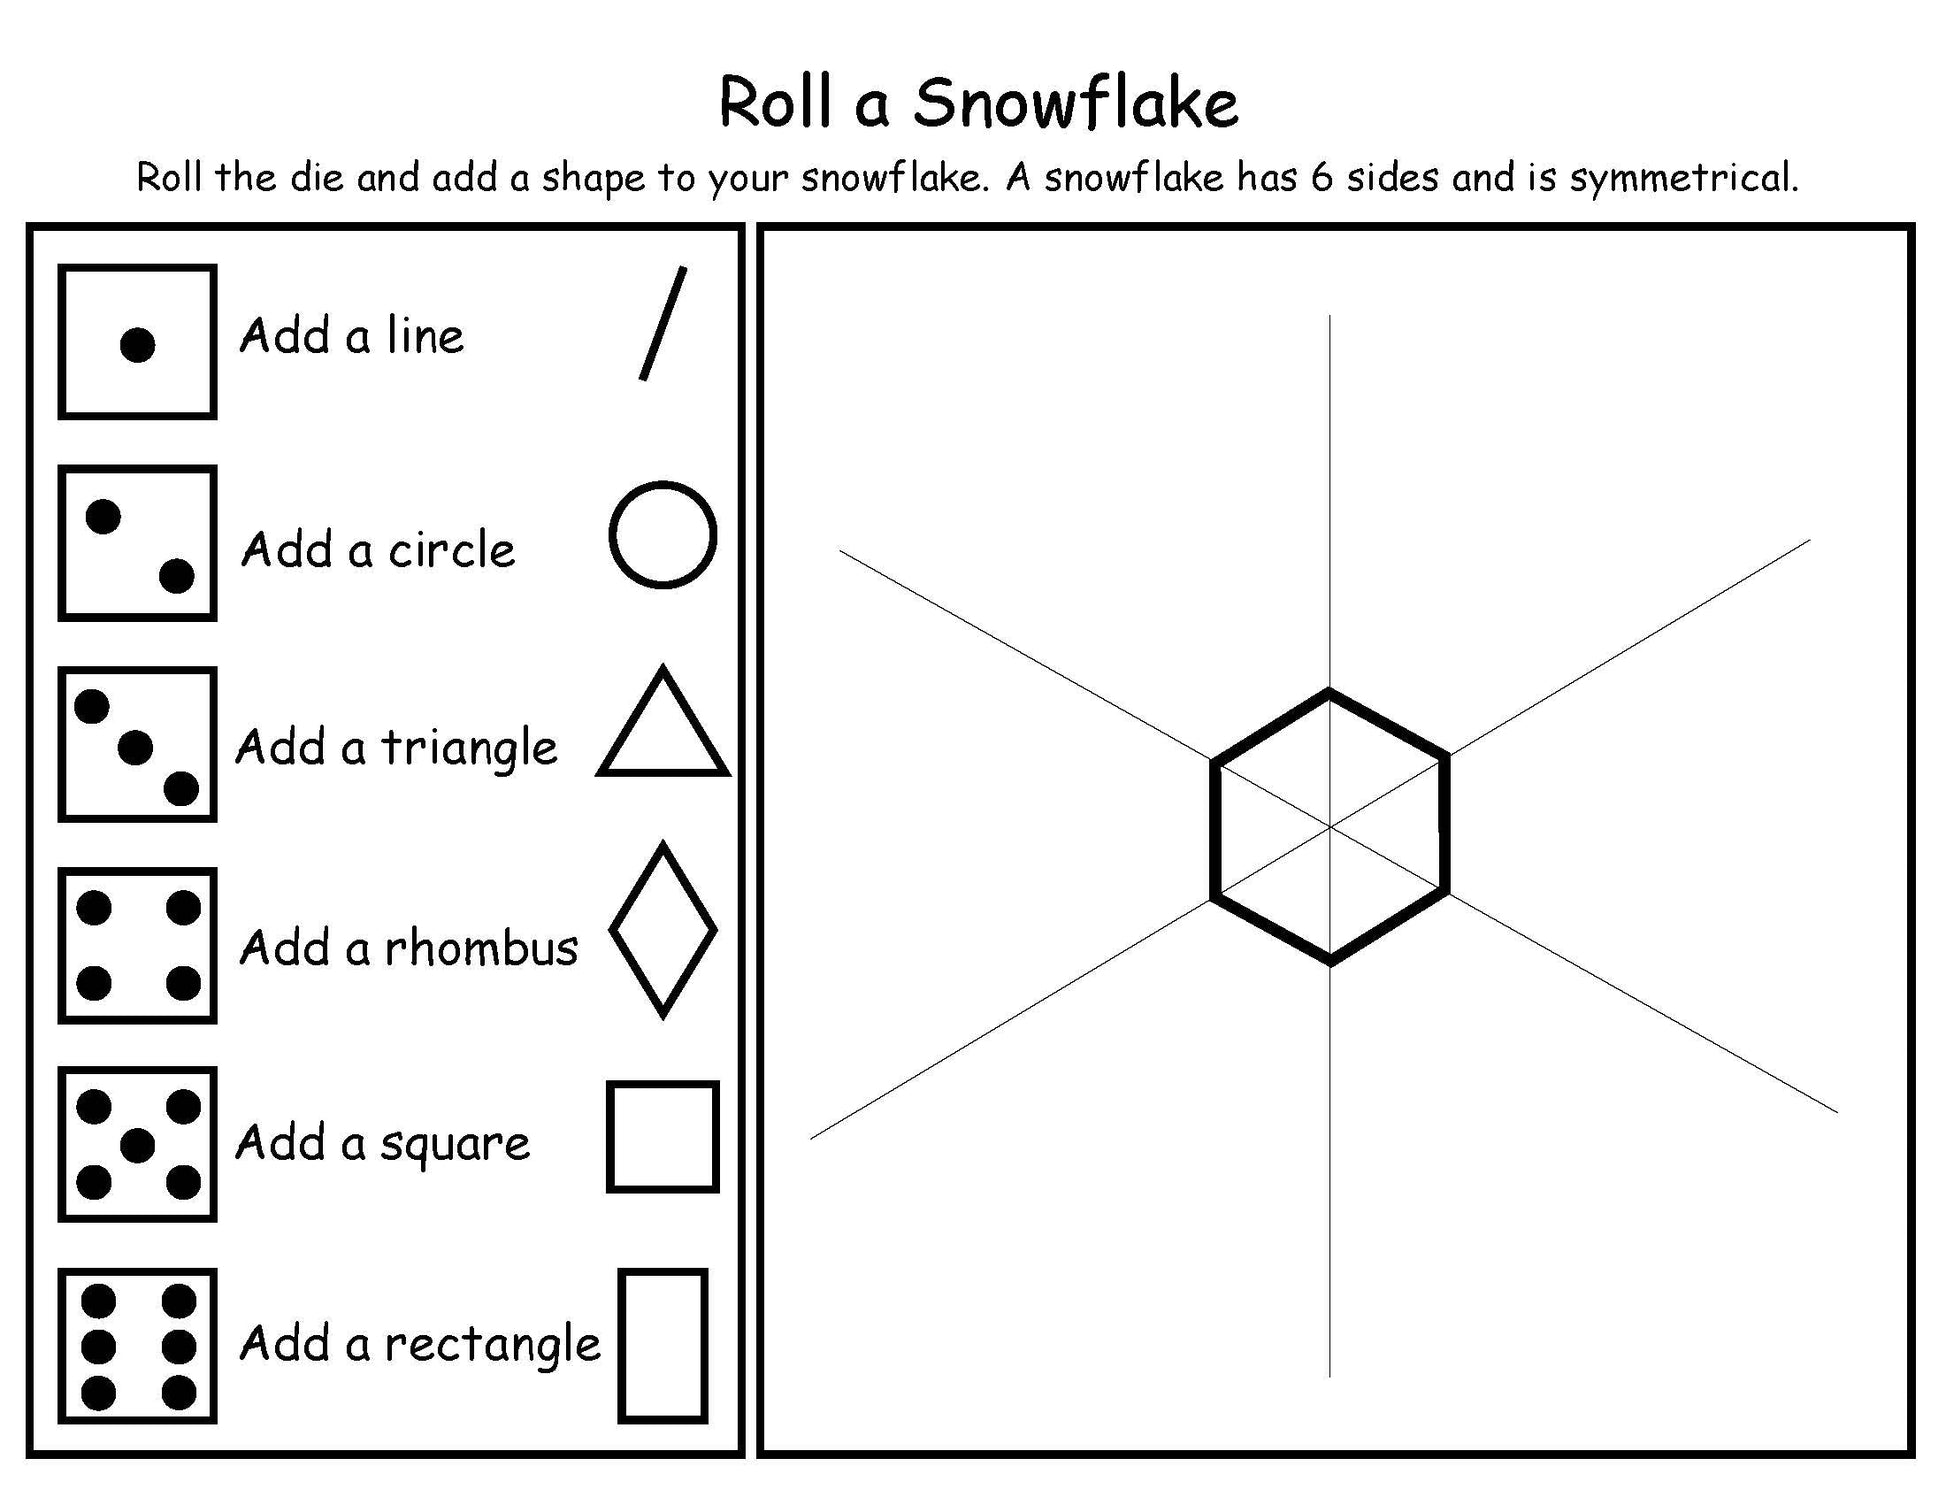 roll a snowflake game math and science activity